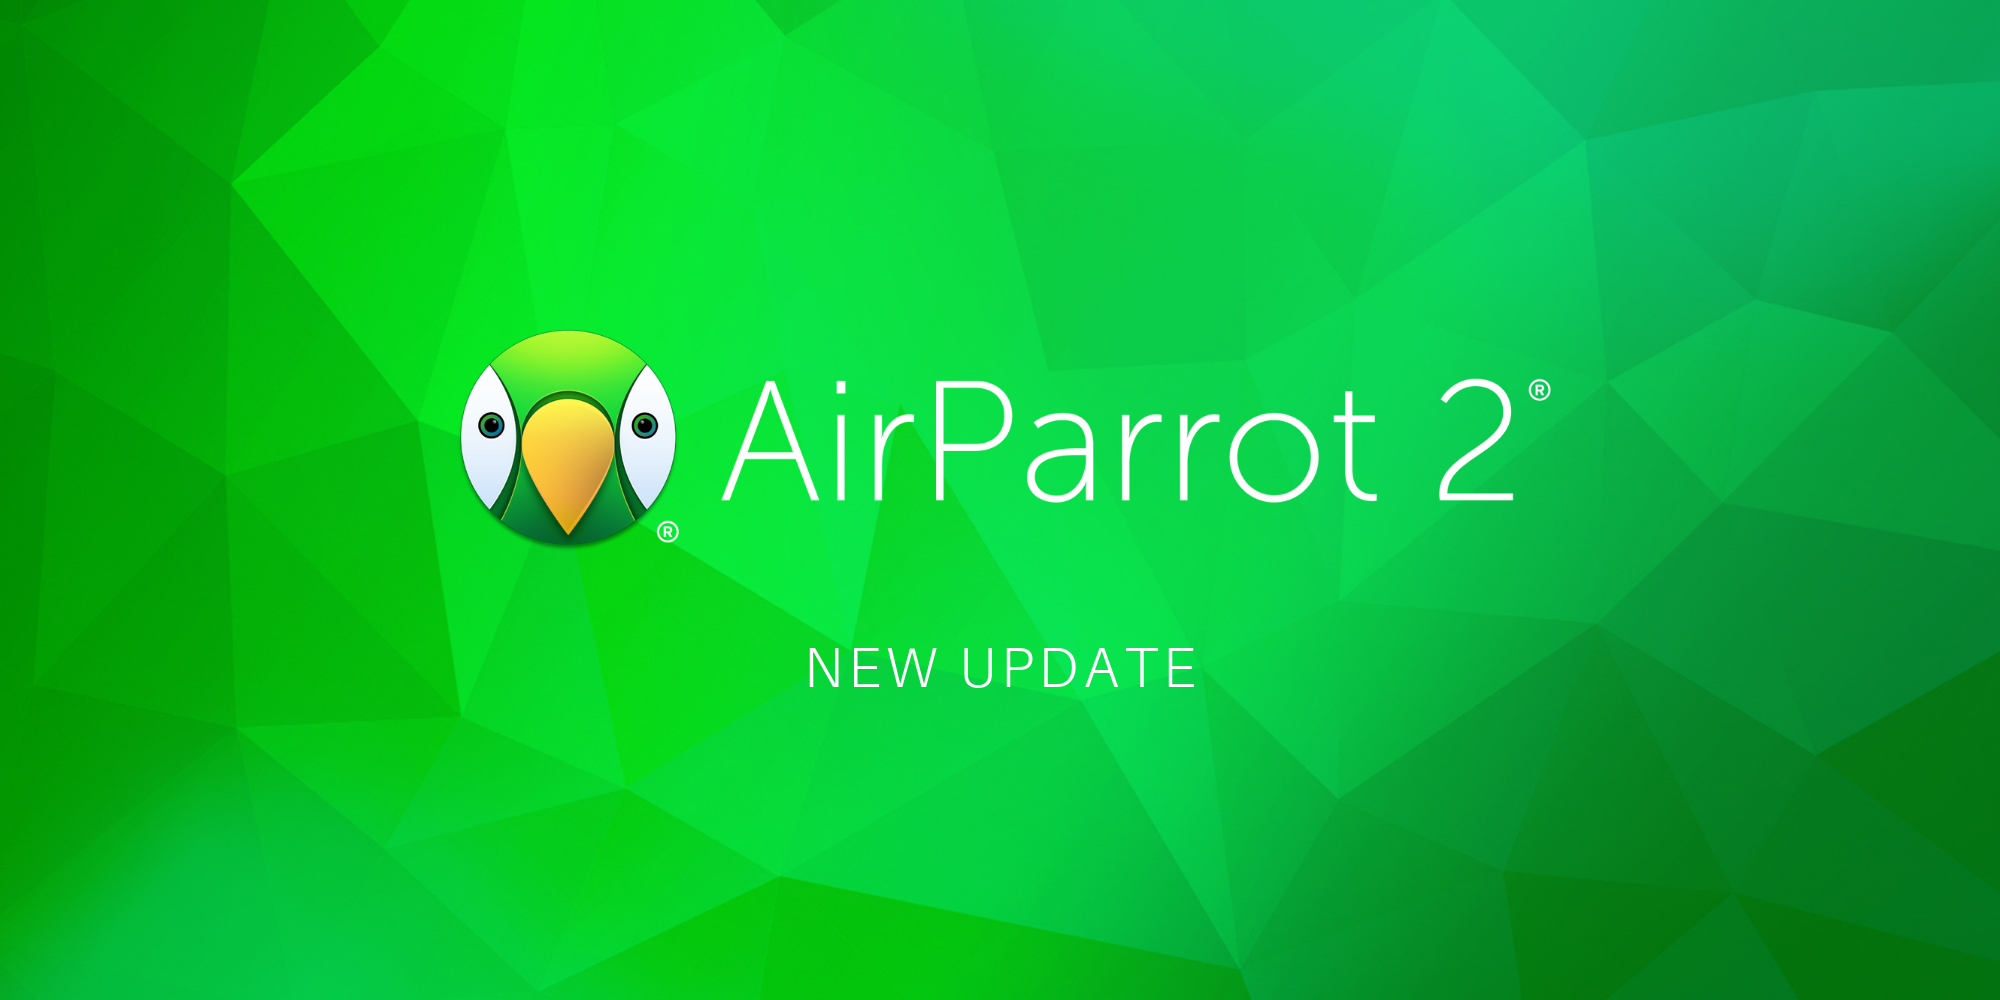 airparrot review